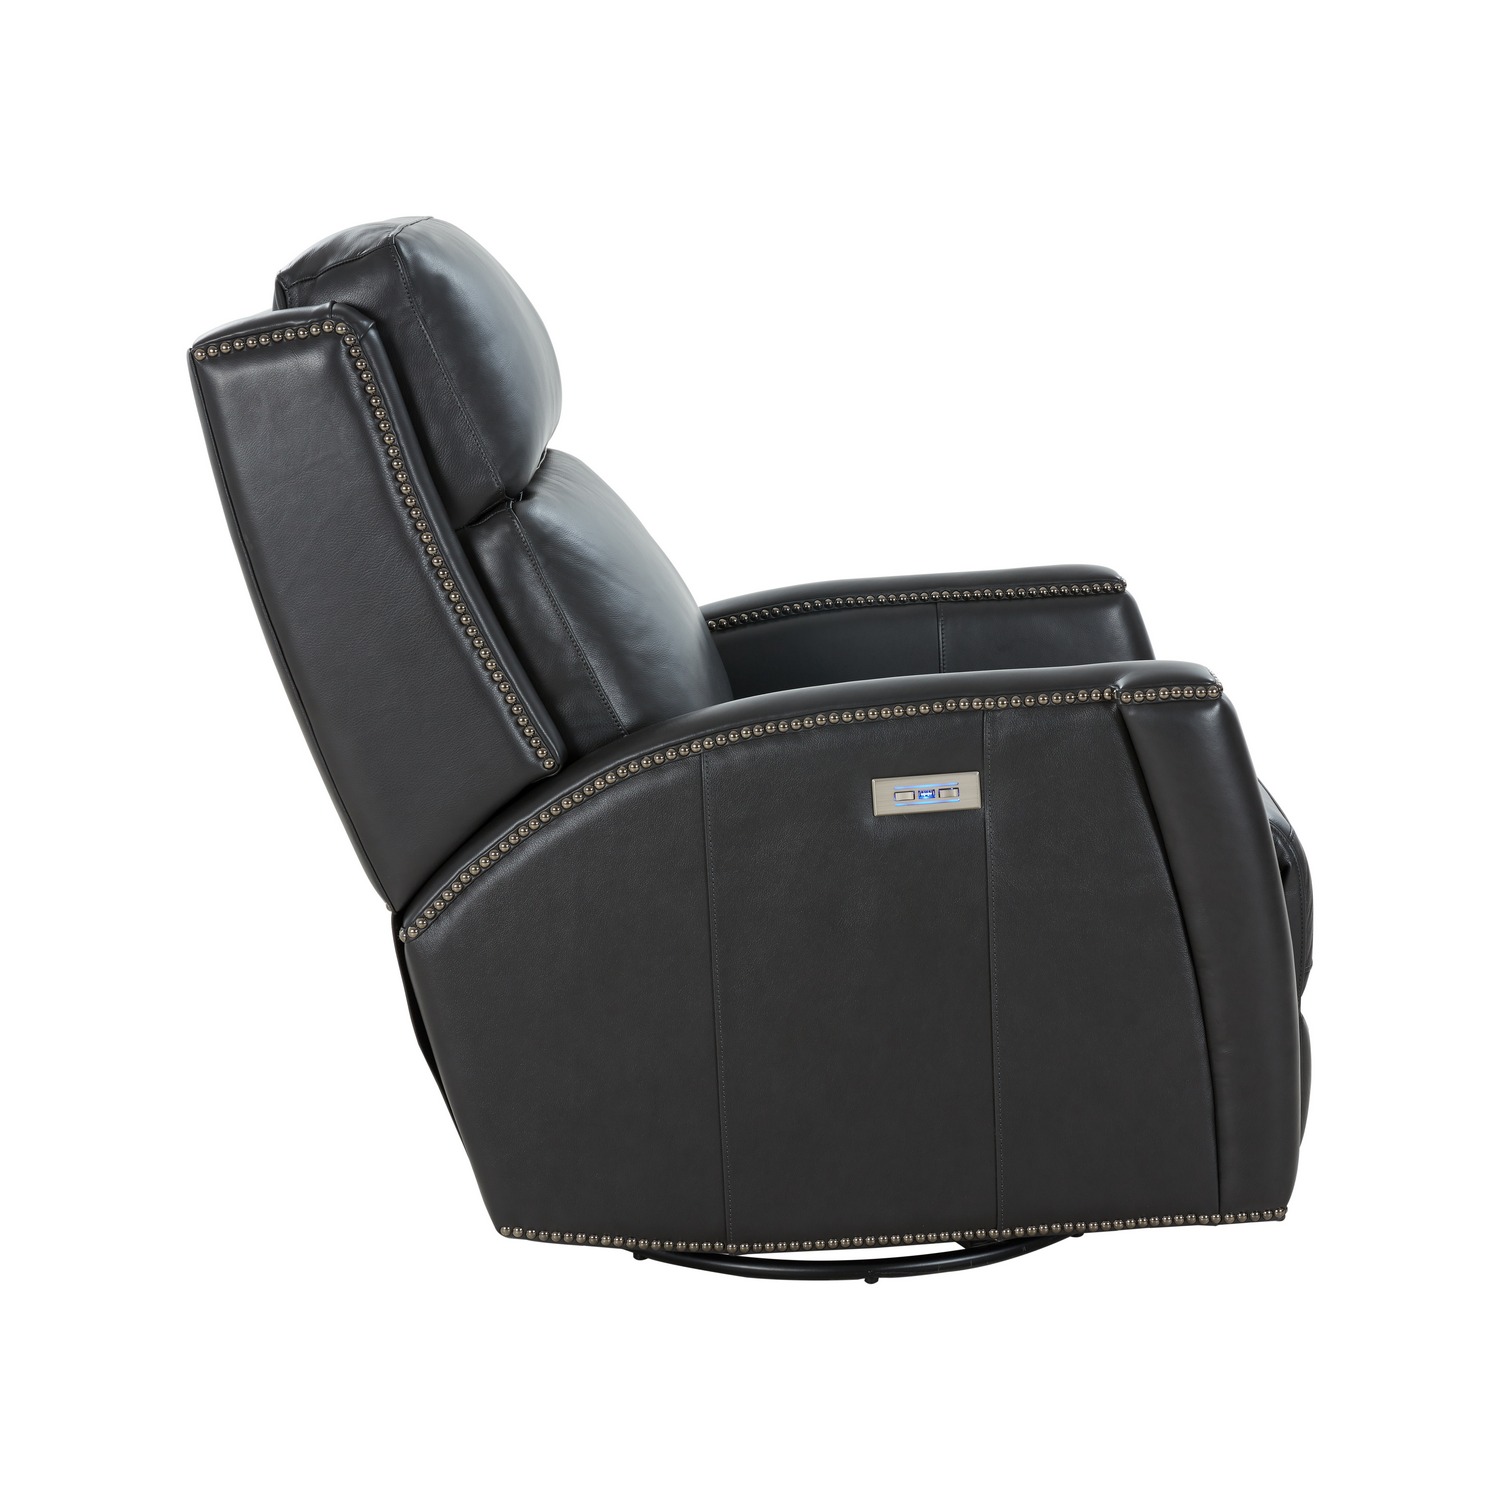 Barcalounger Brandt Power Swivel Glider Recliner Chair with Power Head Rest - Shoreham Gray/All Leather